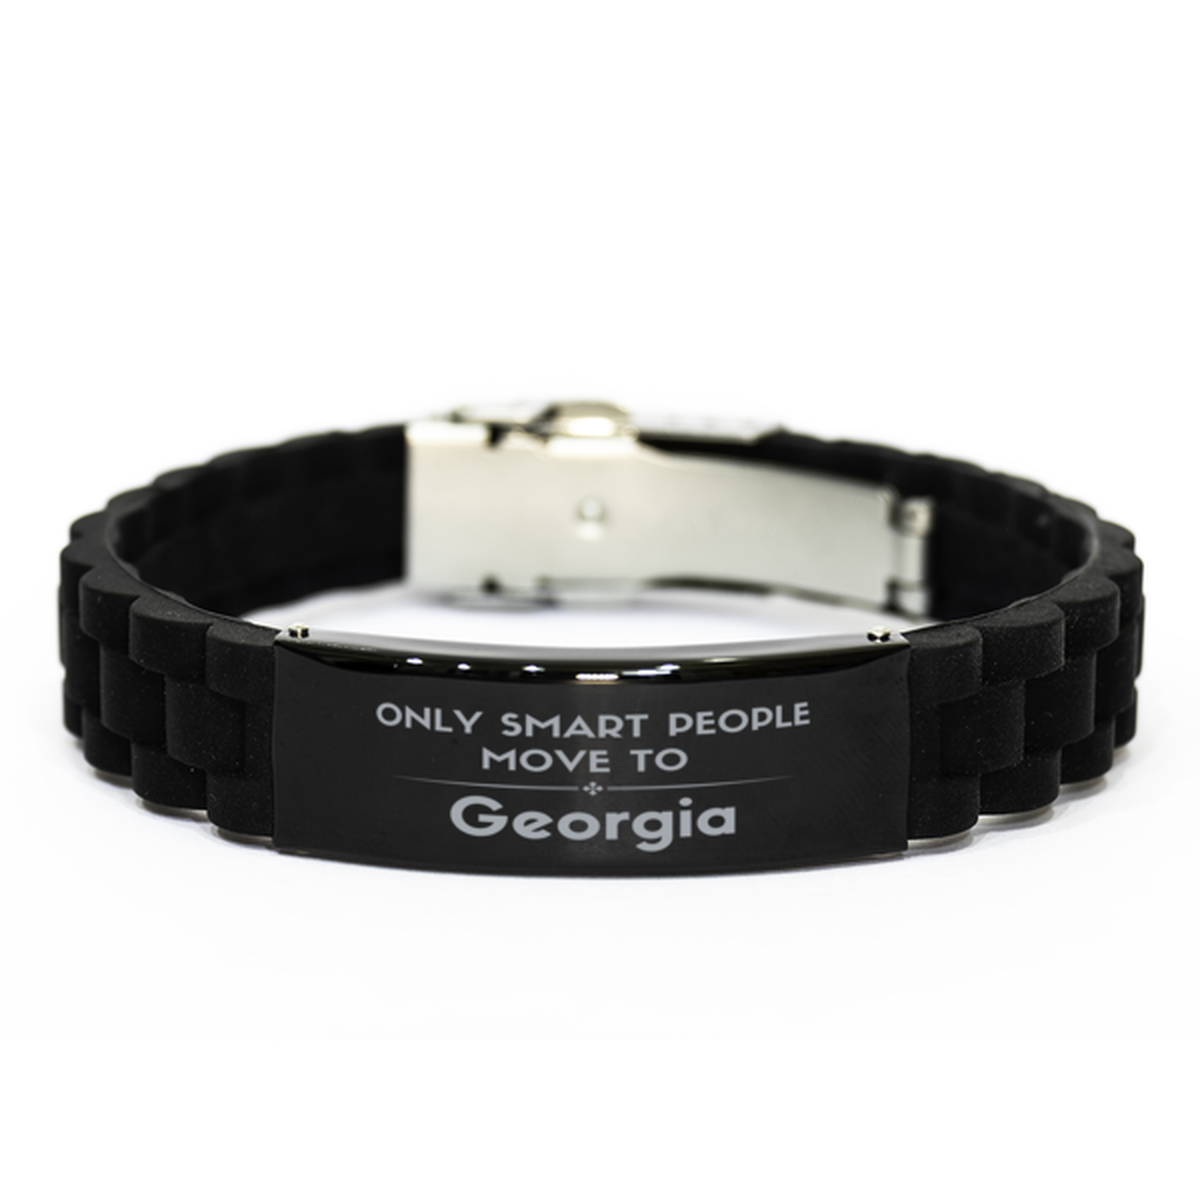 Only smart people move to Georgia Black Glidelock Clasp Bracelet, Gag Gifts For Georgia, Move to Georgia Gifts for Friends Coworker Funny Saying Quote